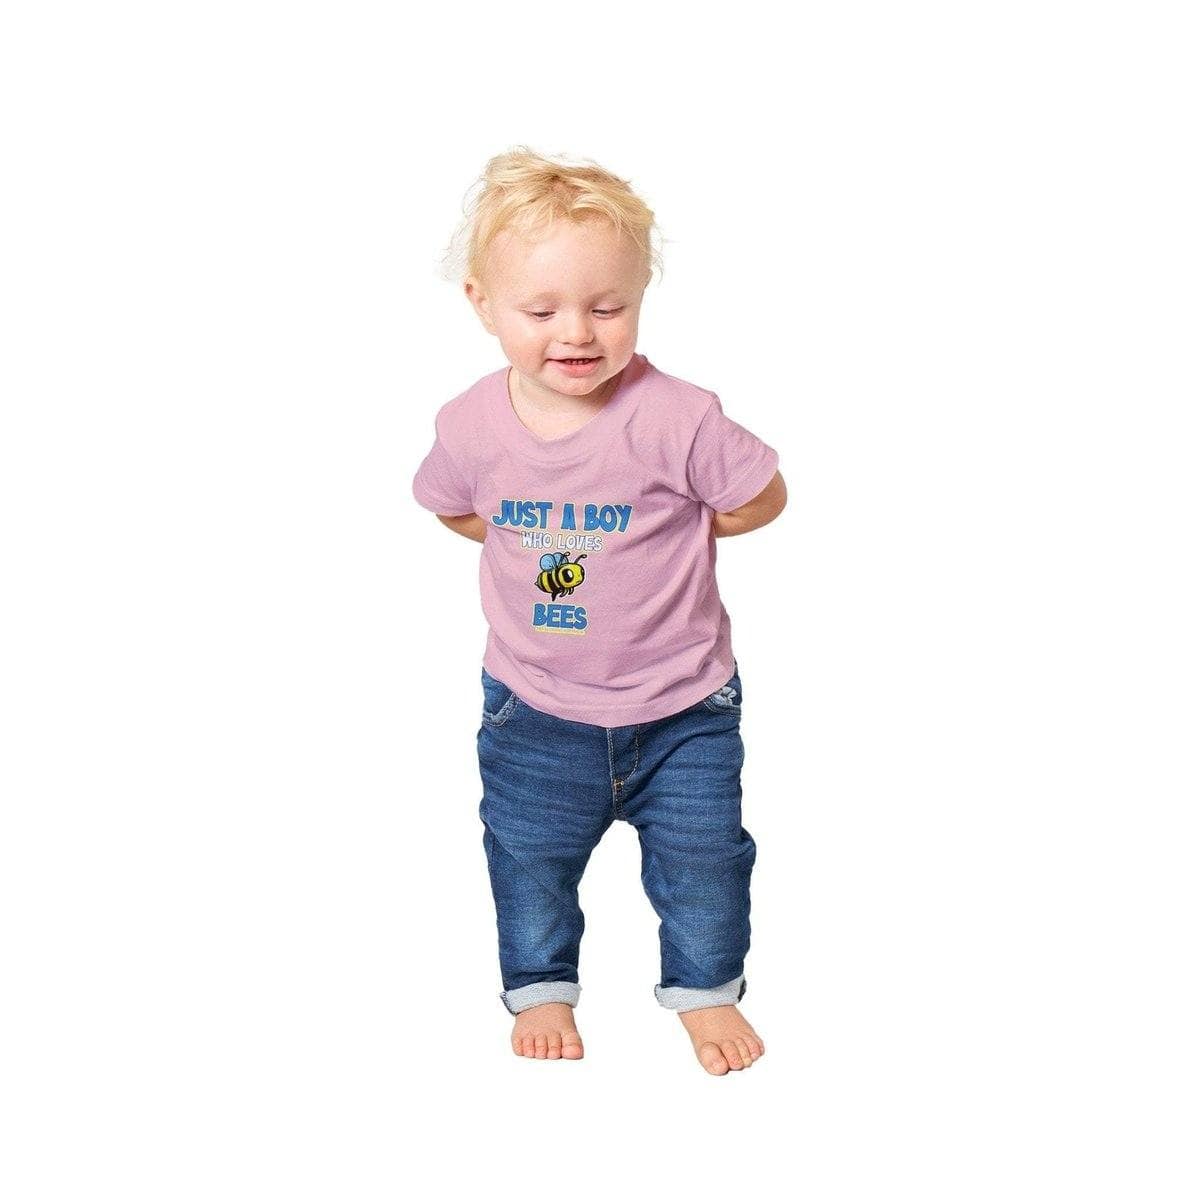 Just a Boy who loves bees T-Shirt - Baby Bee T-Shirts- Classic Baby Crewneck T-shirt Australia Online Color Pink / 6m